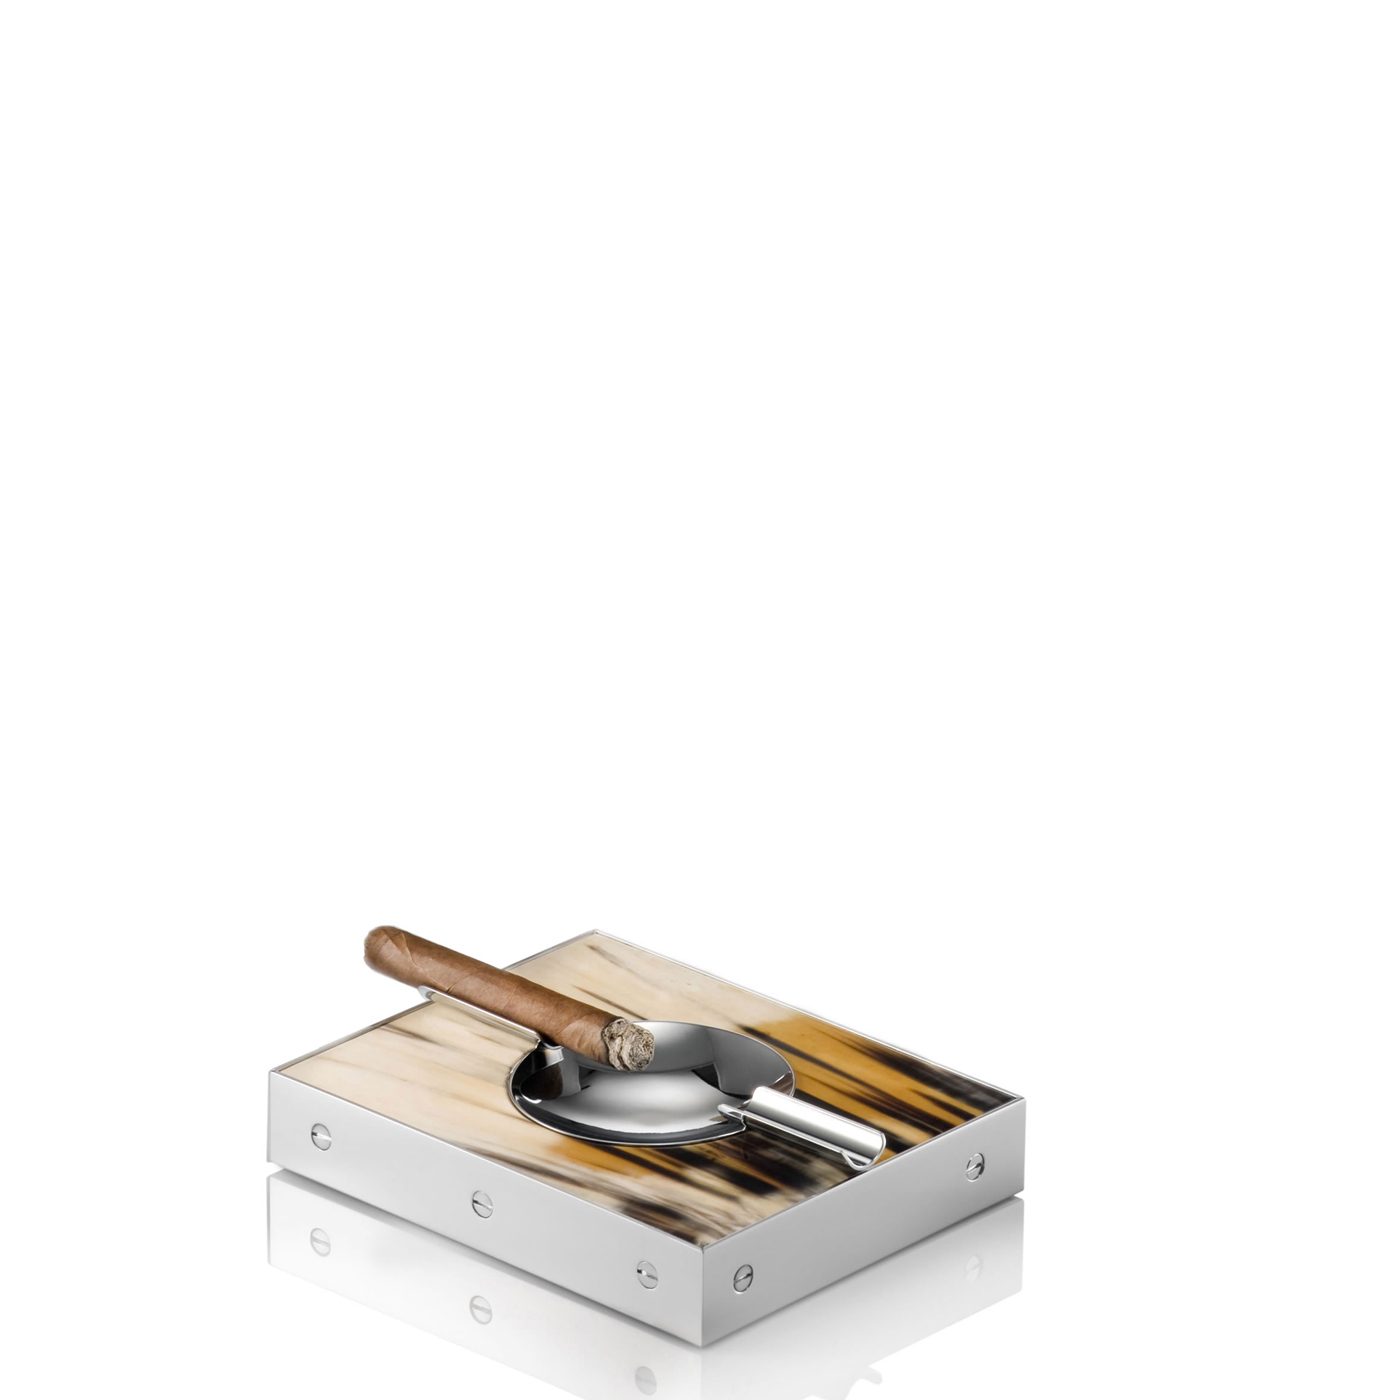 Office sets and smoking accessories - Cassio ashtray in horn and chromed brass mod. 1368 - Arcahorn